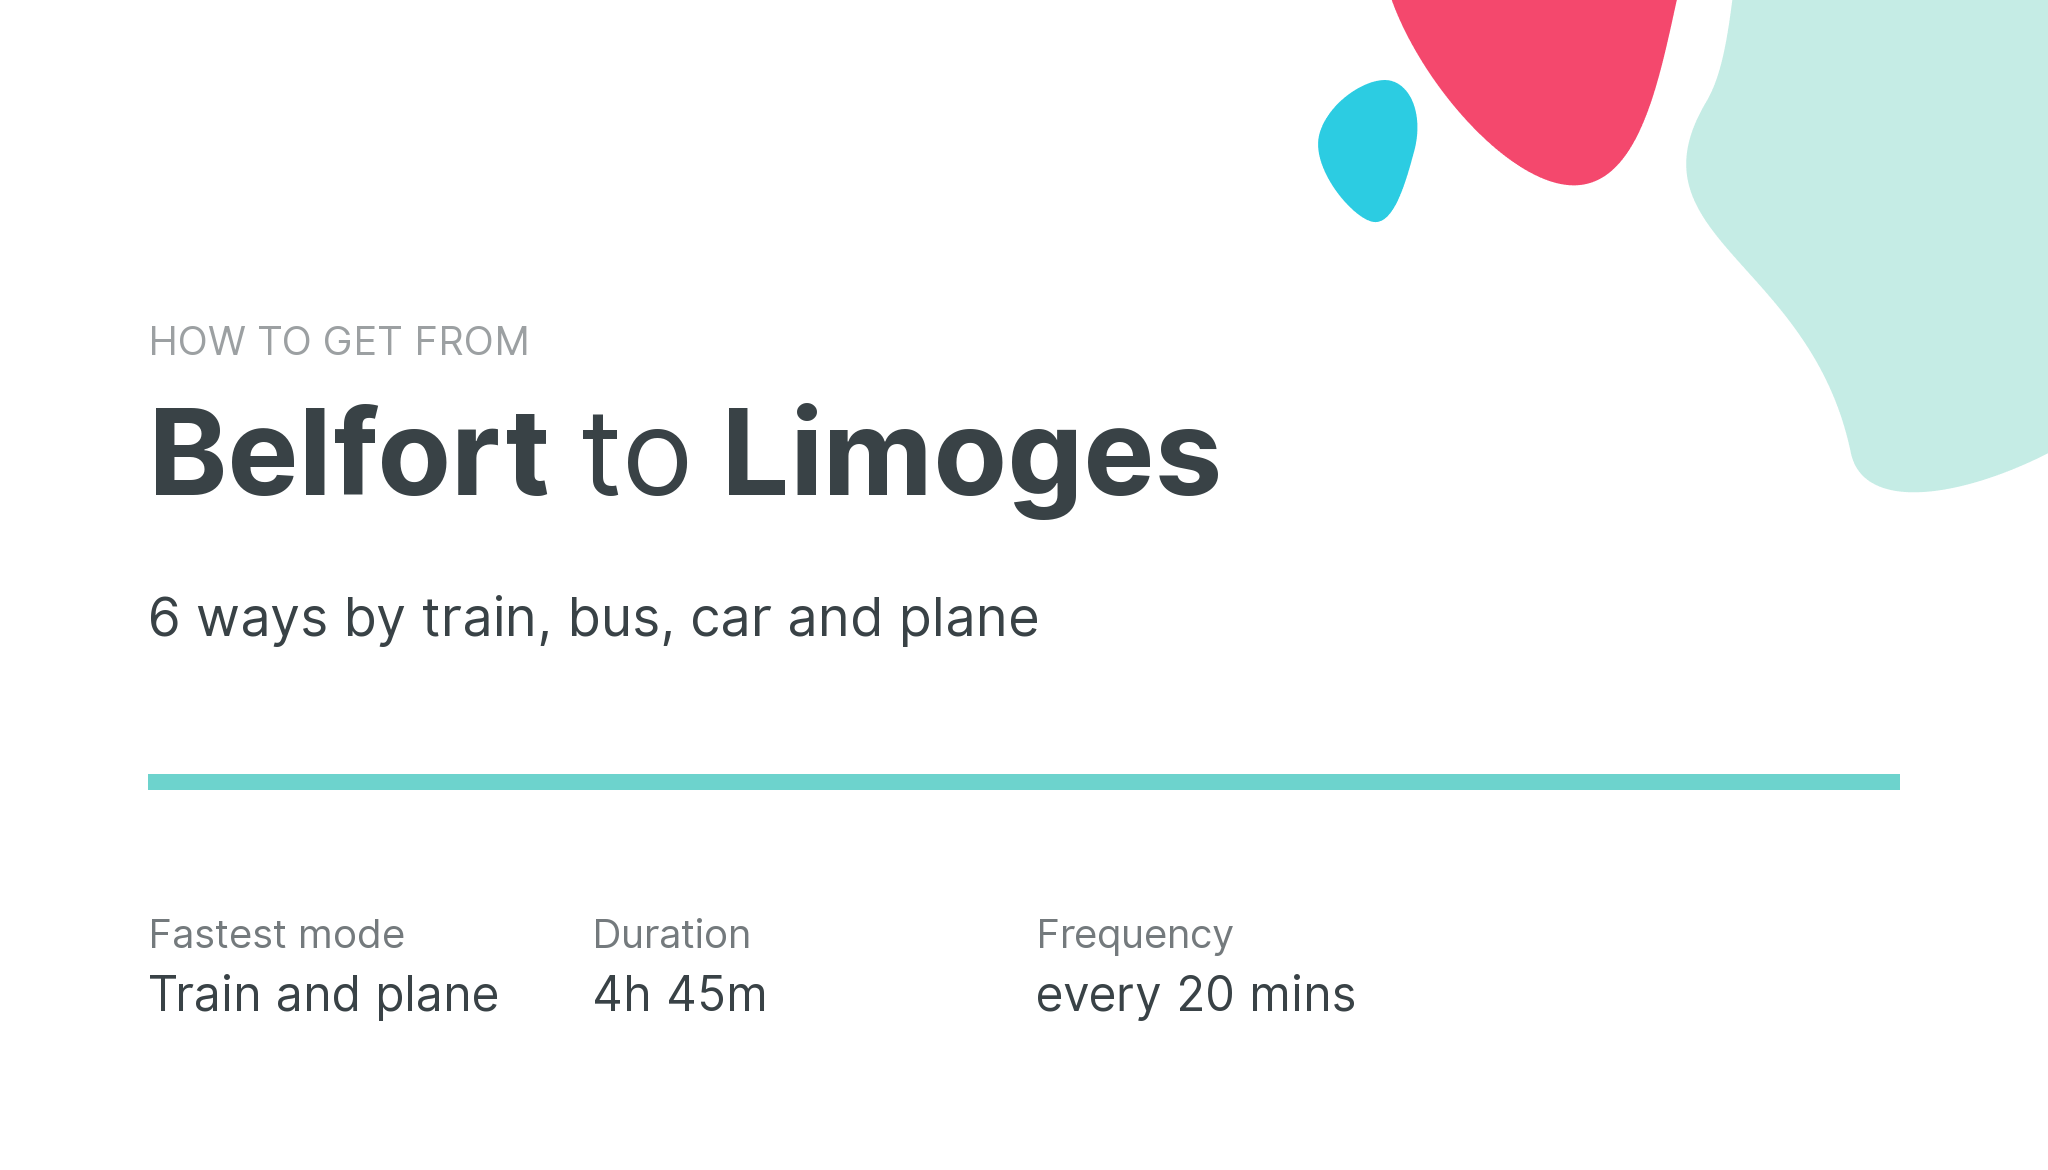 How do I get from Belfort to Limoges